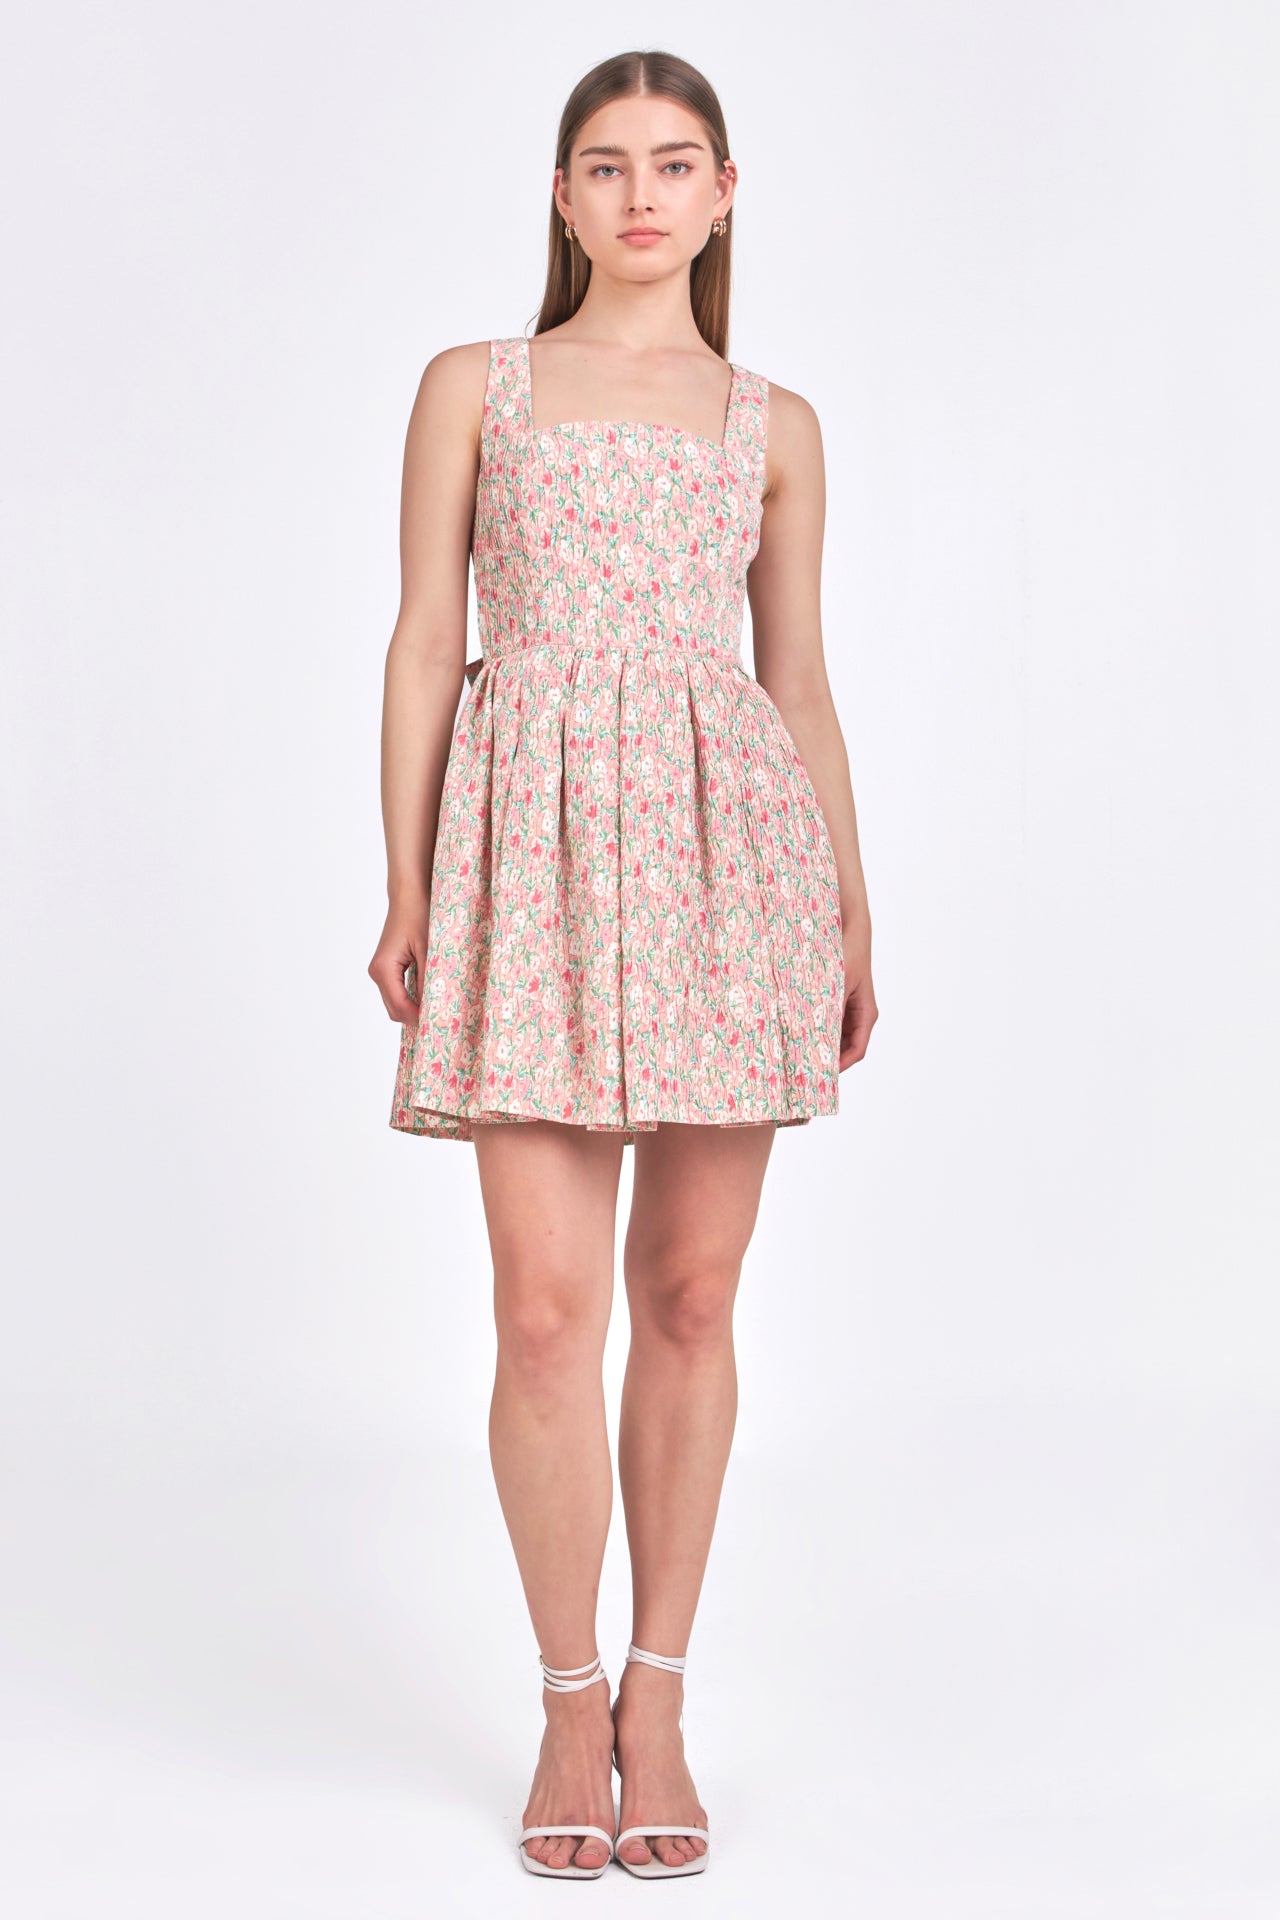 ENDLESS ROSE - Floral Textured Bow Tie Mini Dress - DRESSES available at Objectrare